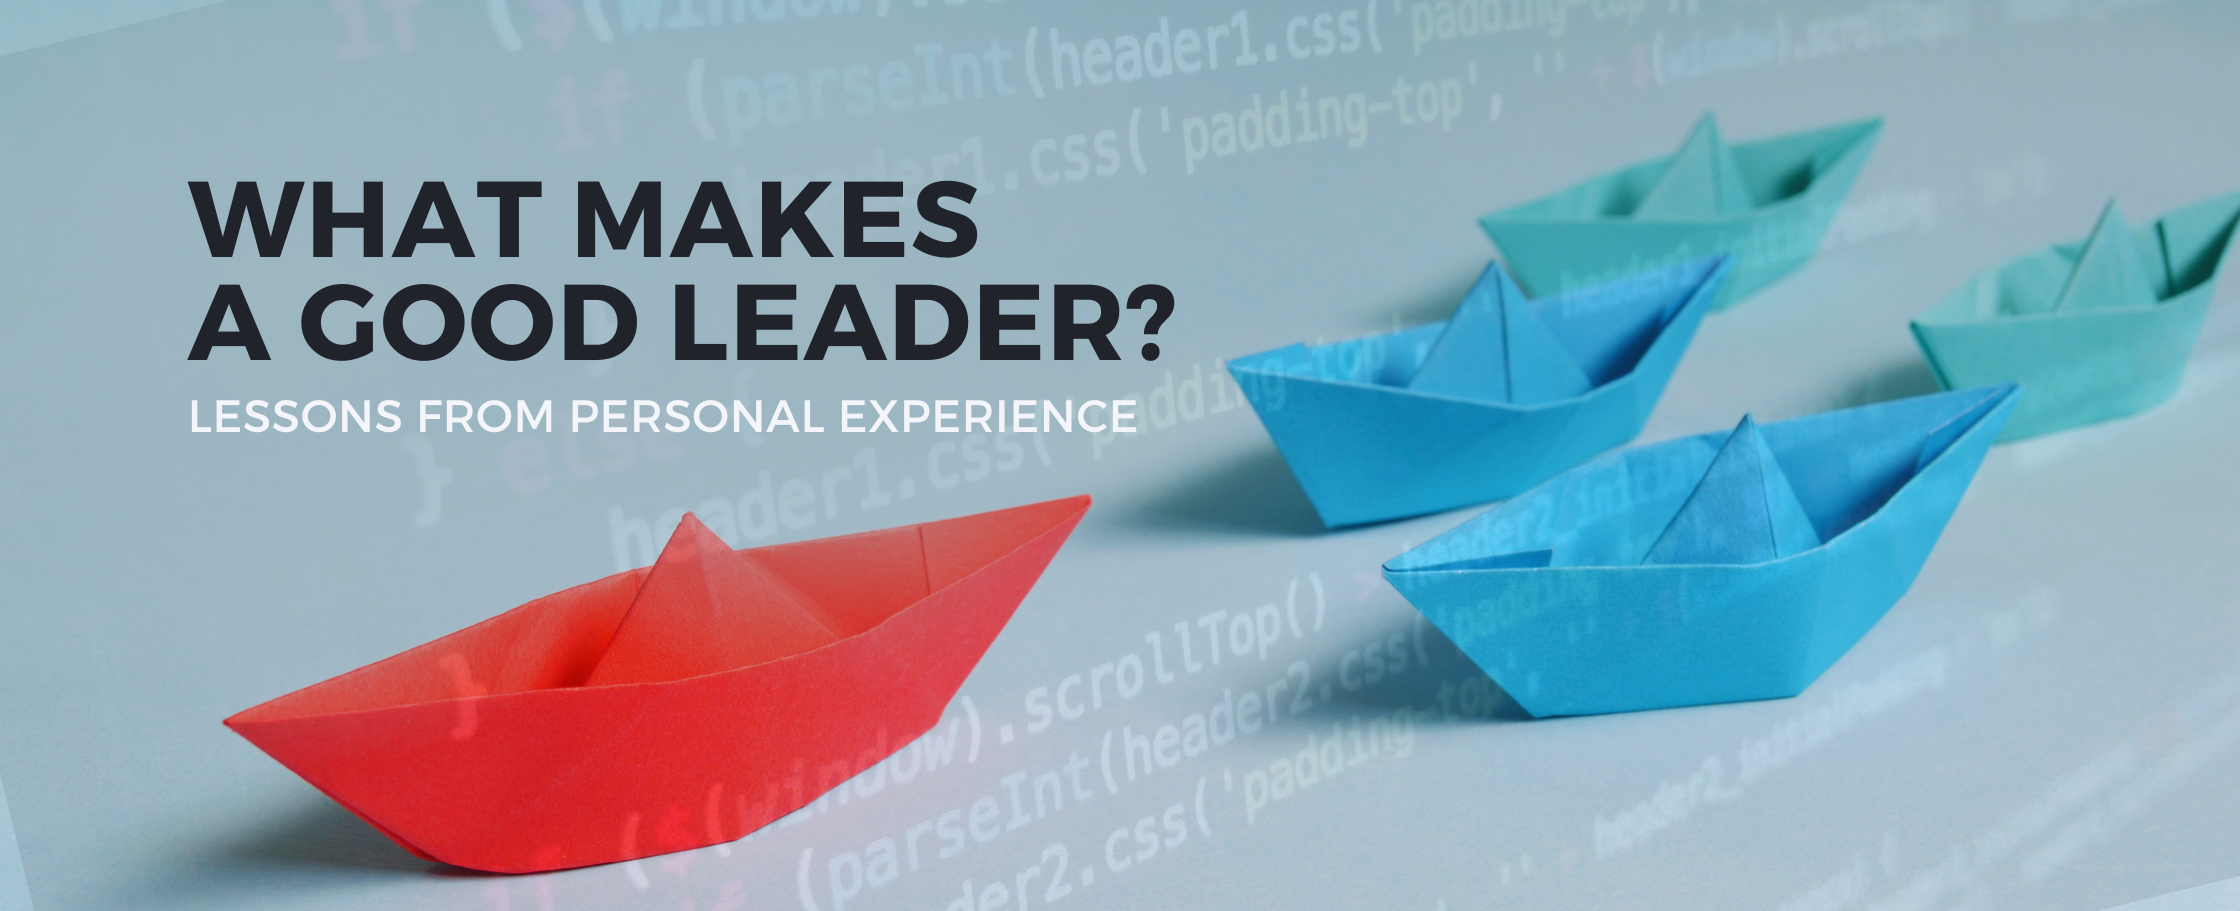 What Makes a Good Leader? Lessons from Personal Experience